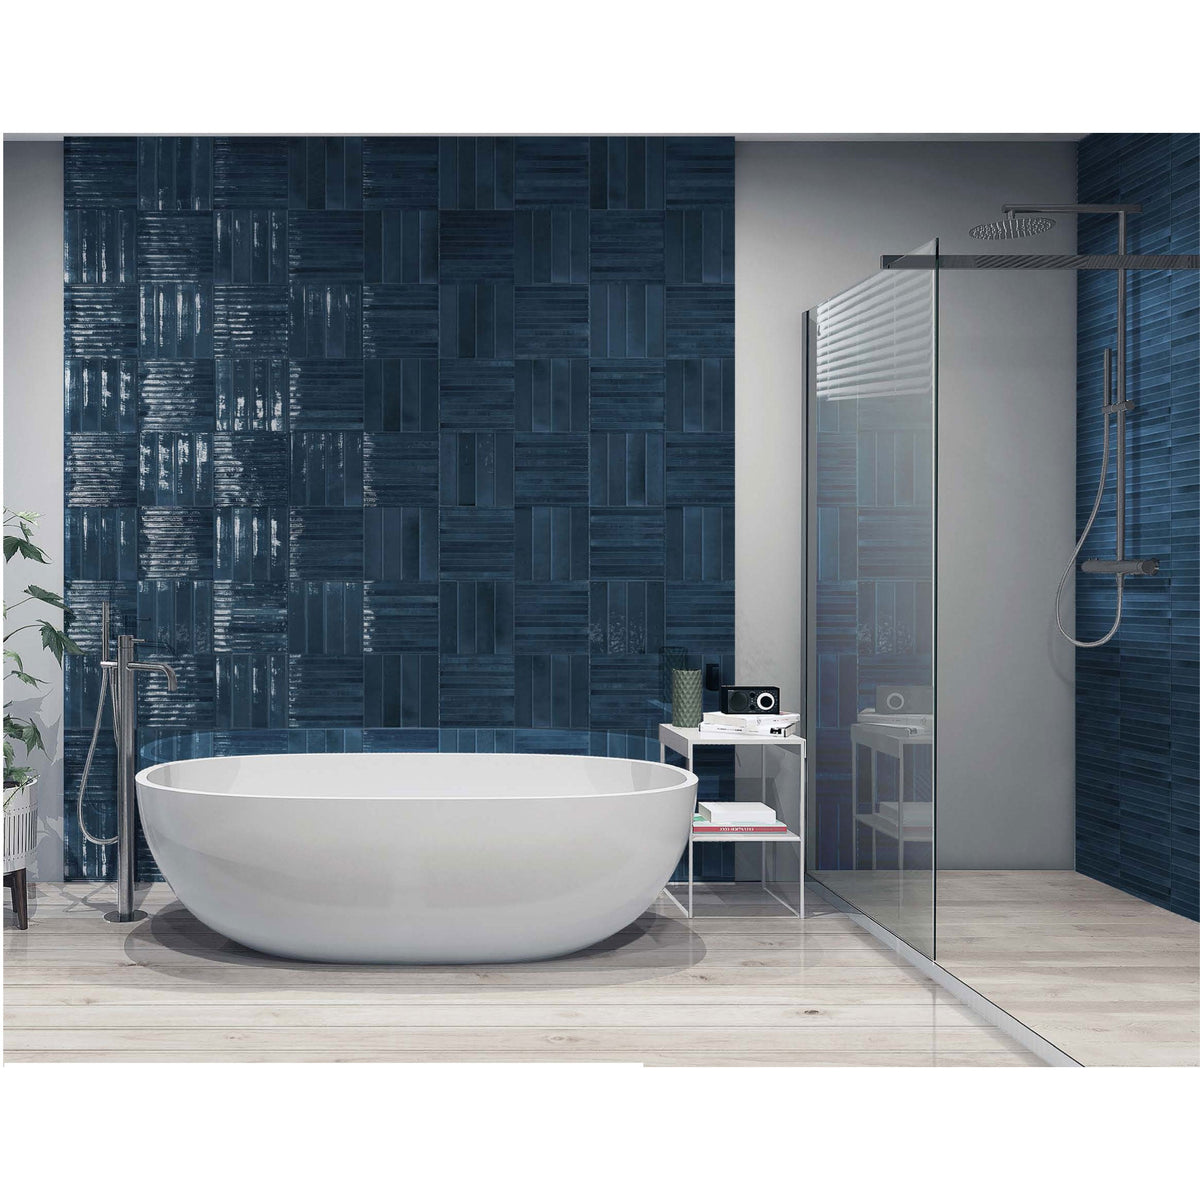 Cobsa - Homey Series 5 in. x 10 in. Porcelain Subway Tile - Navy Installed